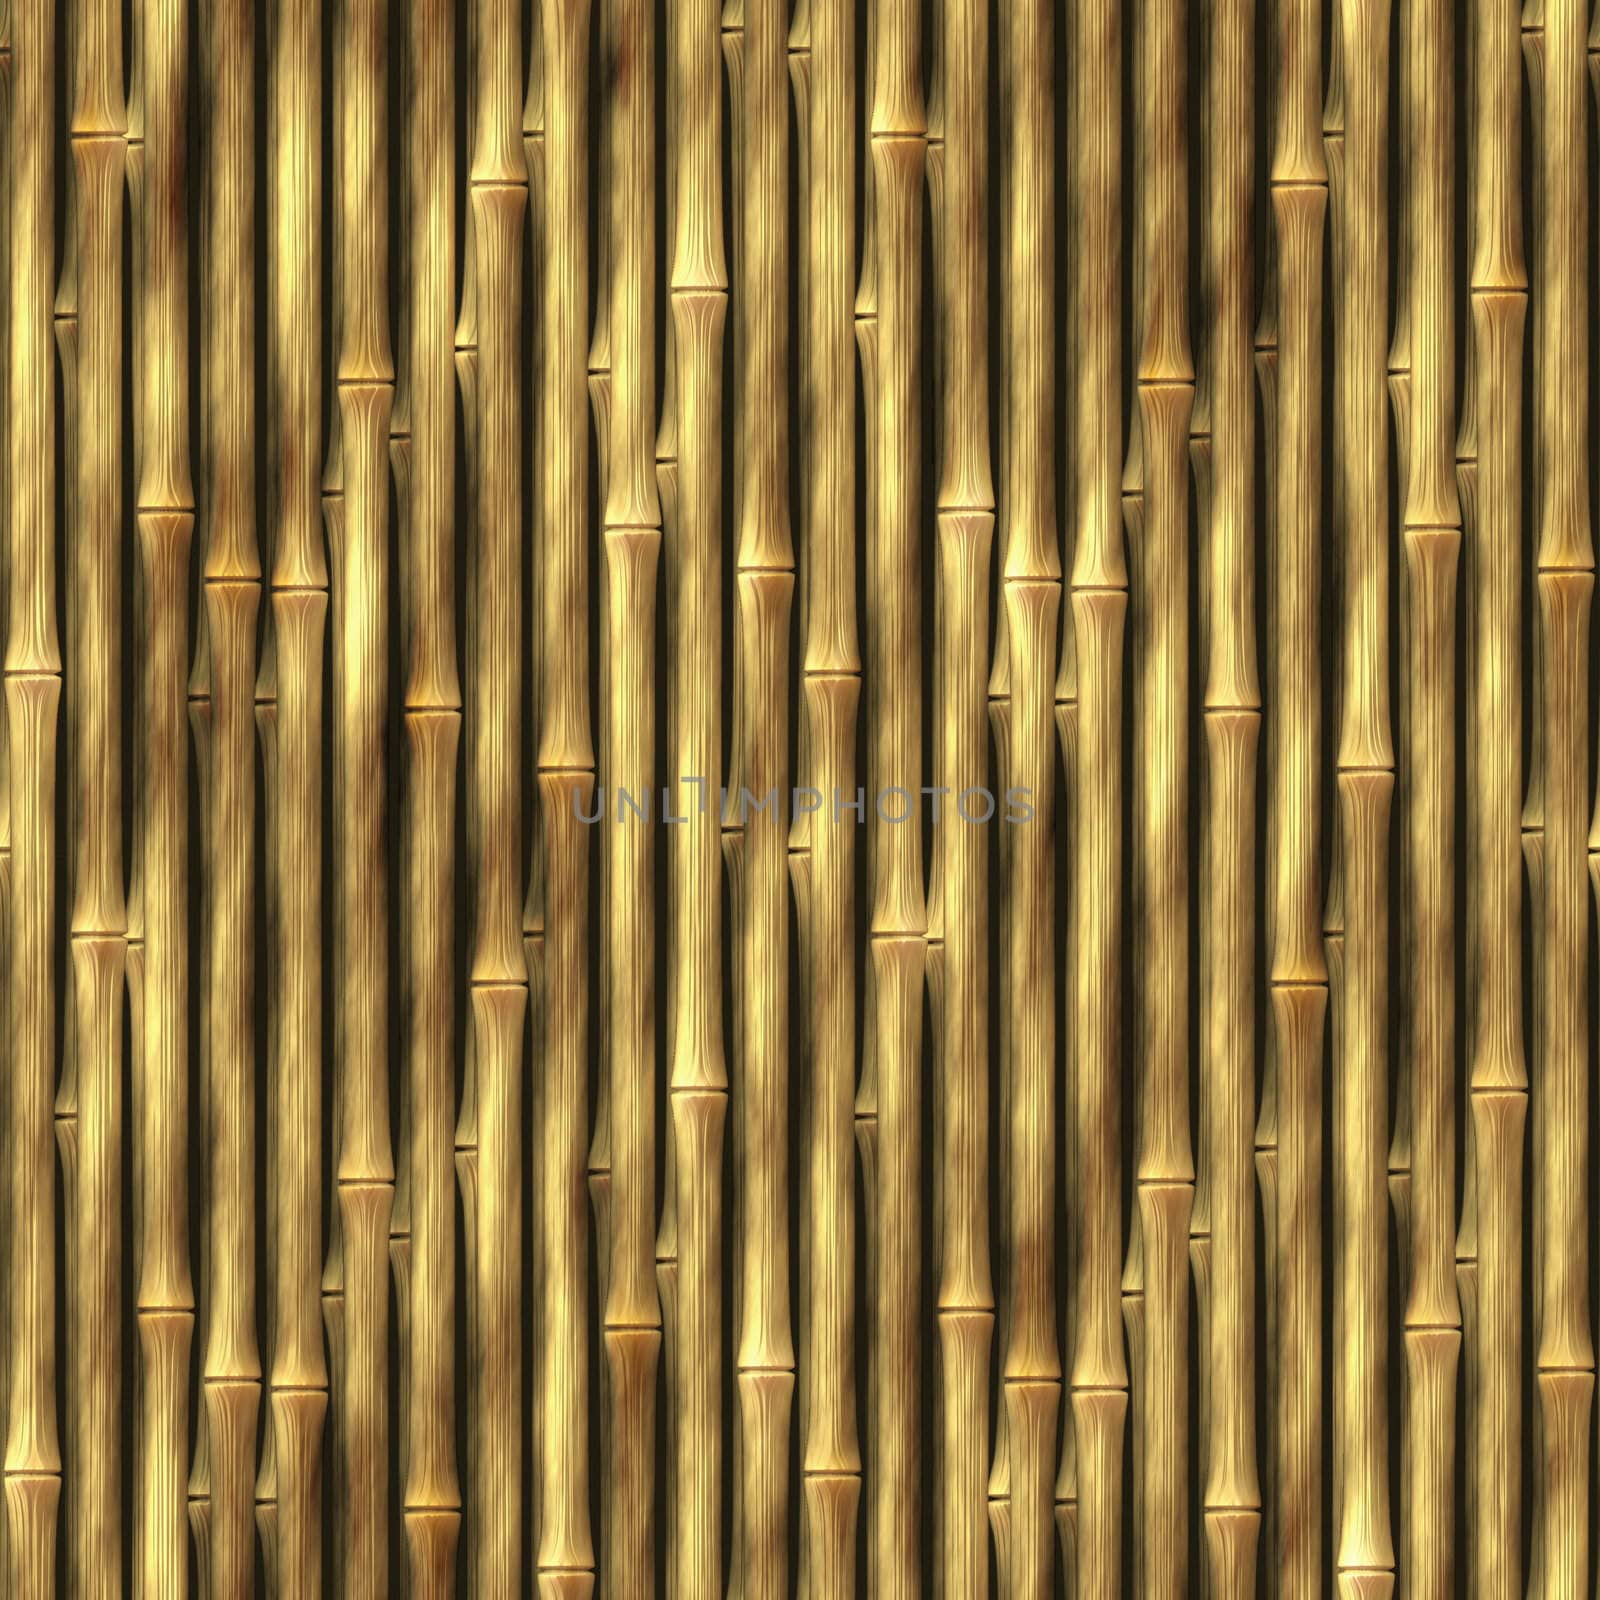 Bamboo poles background texture that tiles seamlessly as a pattern.